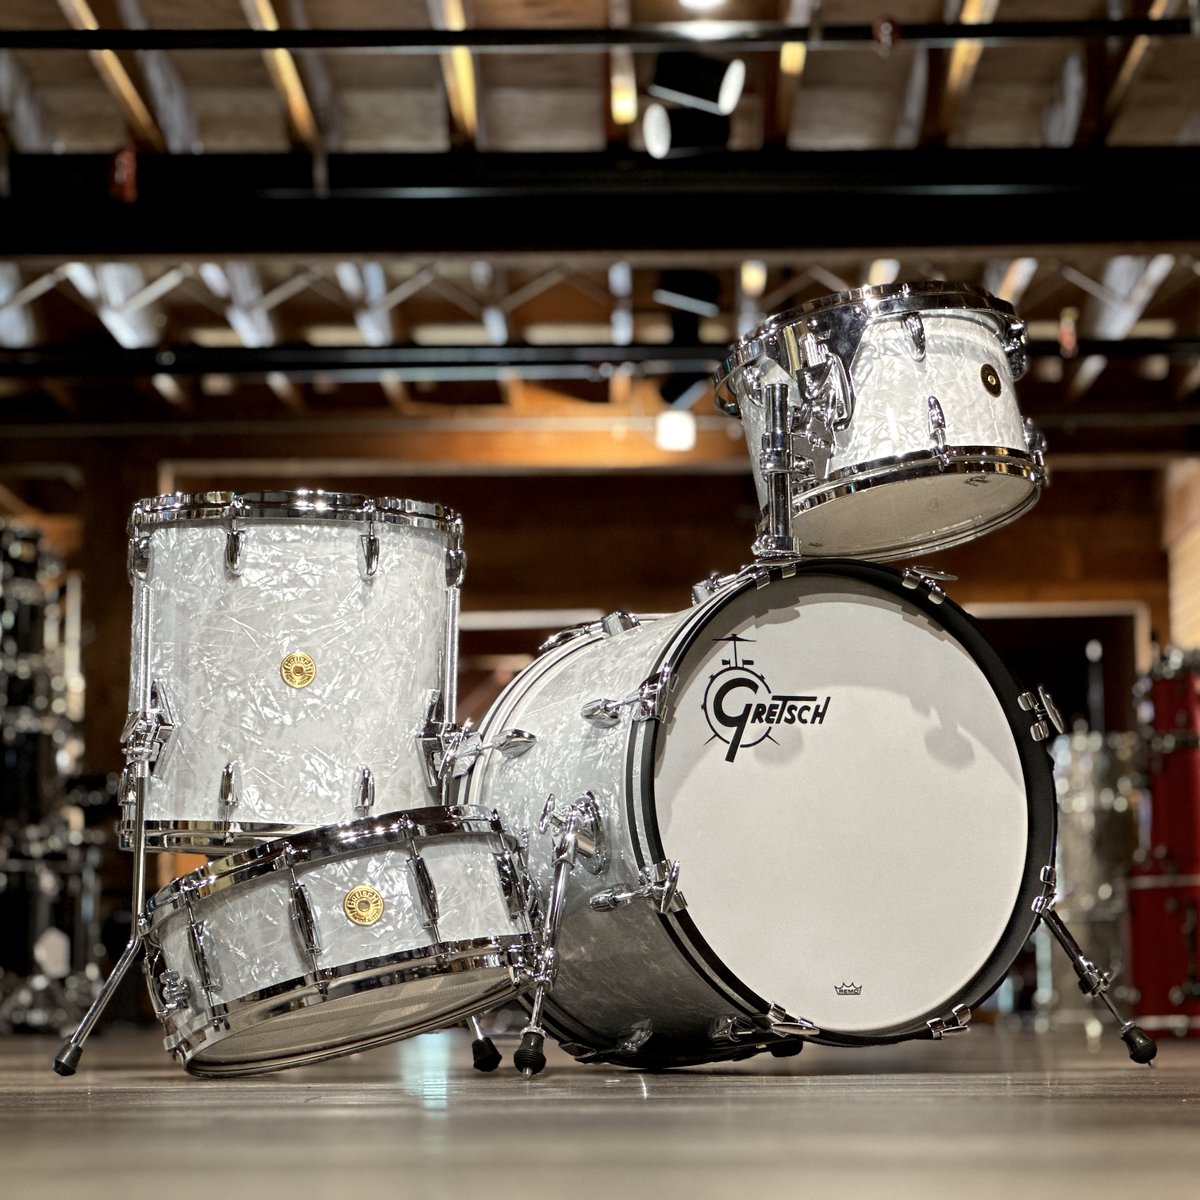 Founded in 2009 by Shane Kinney in Portsmouth, New Hampshire, Drum Center of Portsmouth is the world's largest active drum shop. Let's give it up for Drum Center of Portsmouth! #GretschDrums140 @drumcenternh